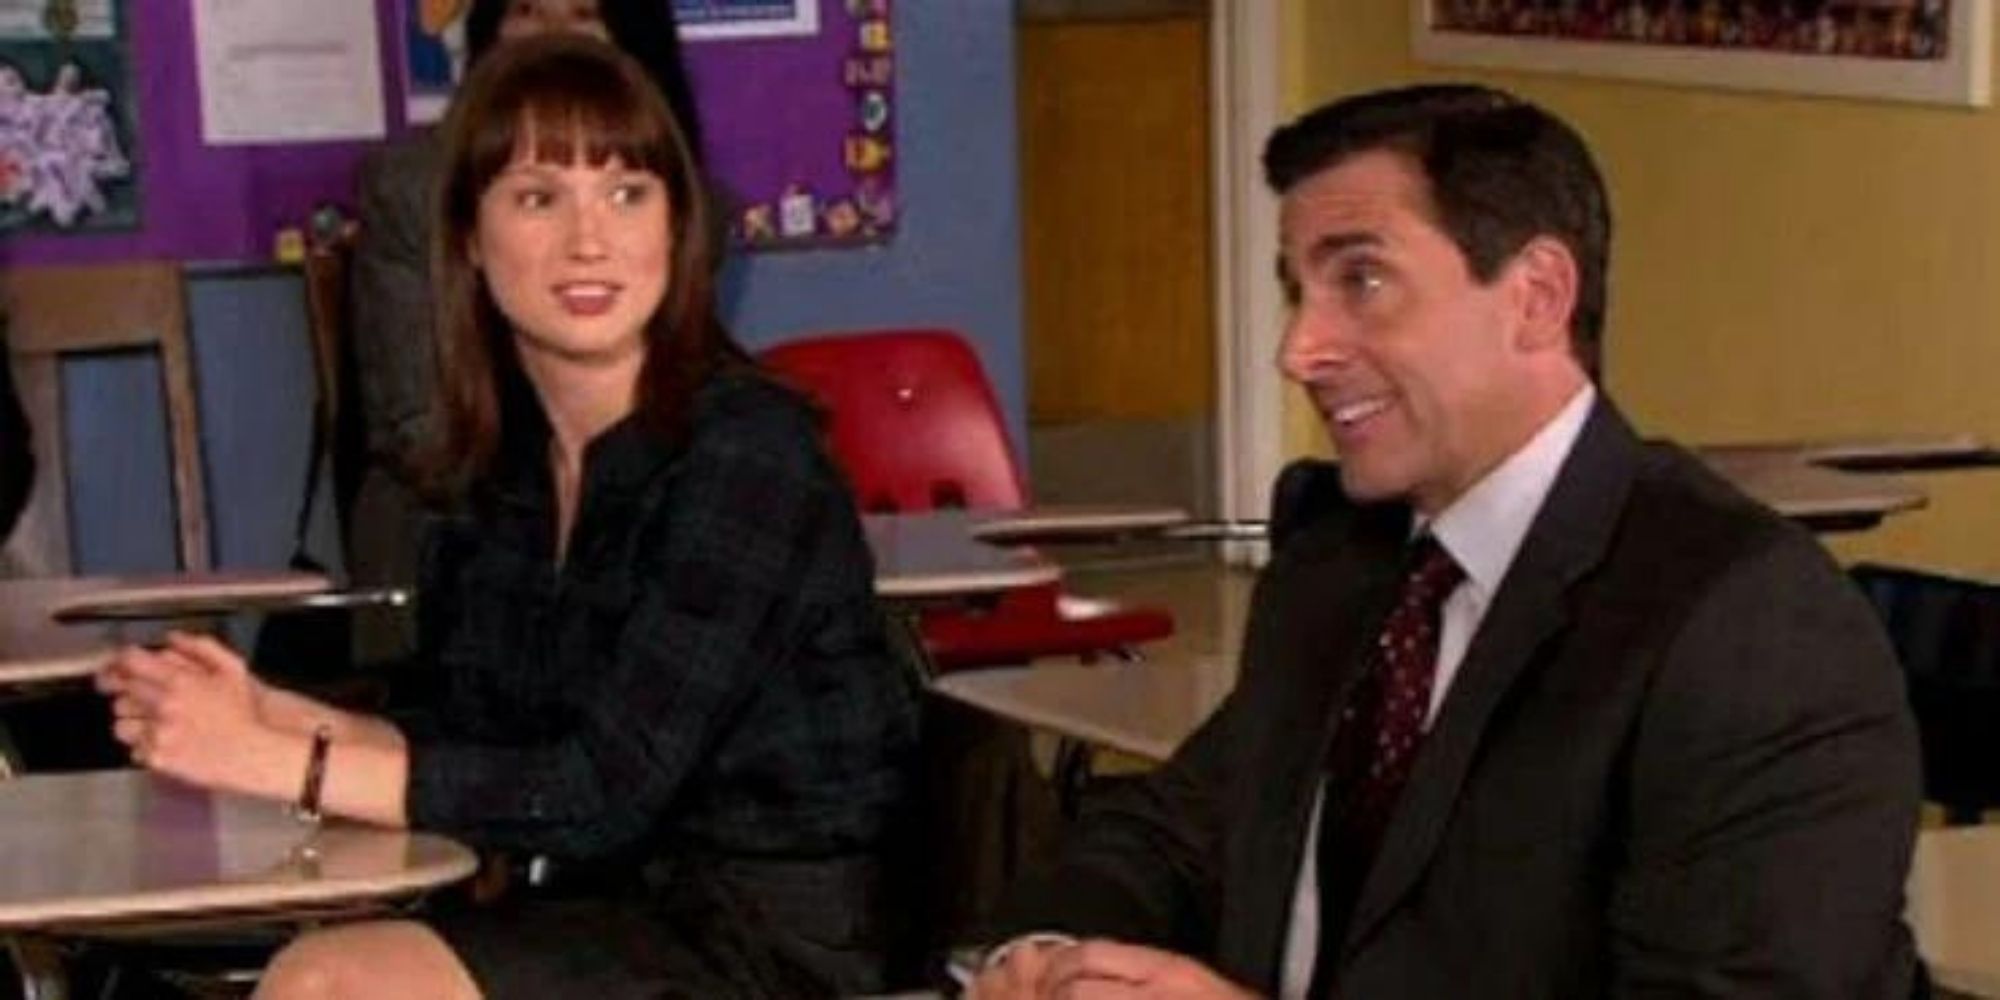 Michael and Erin from The Office at a high school